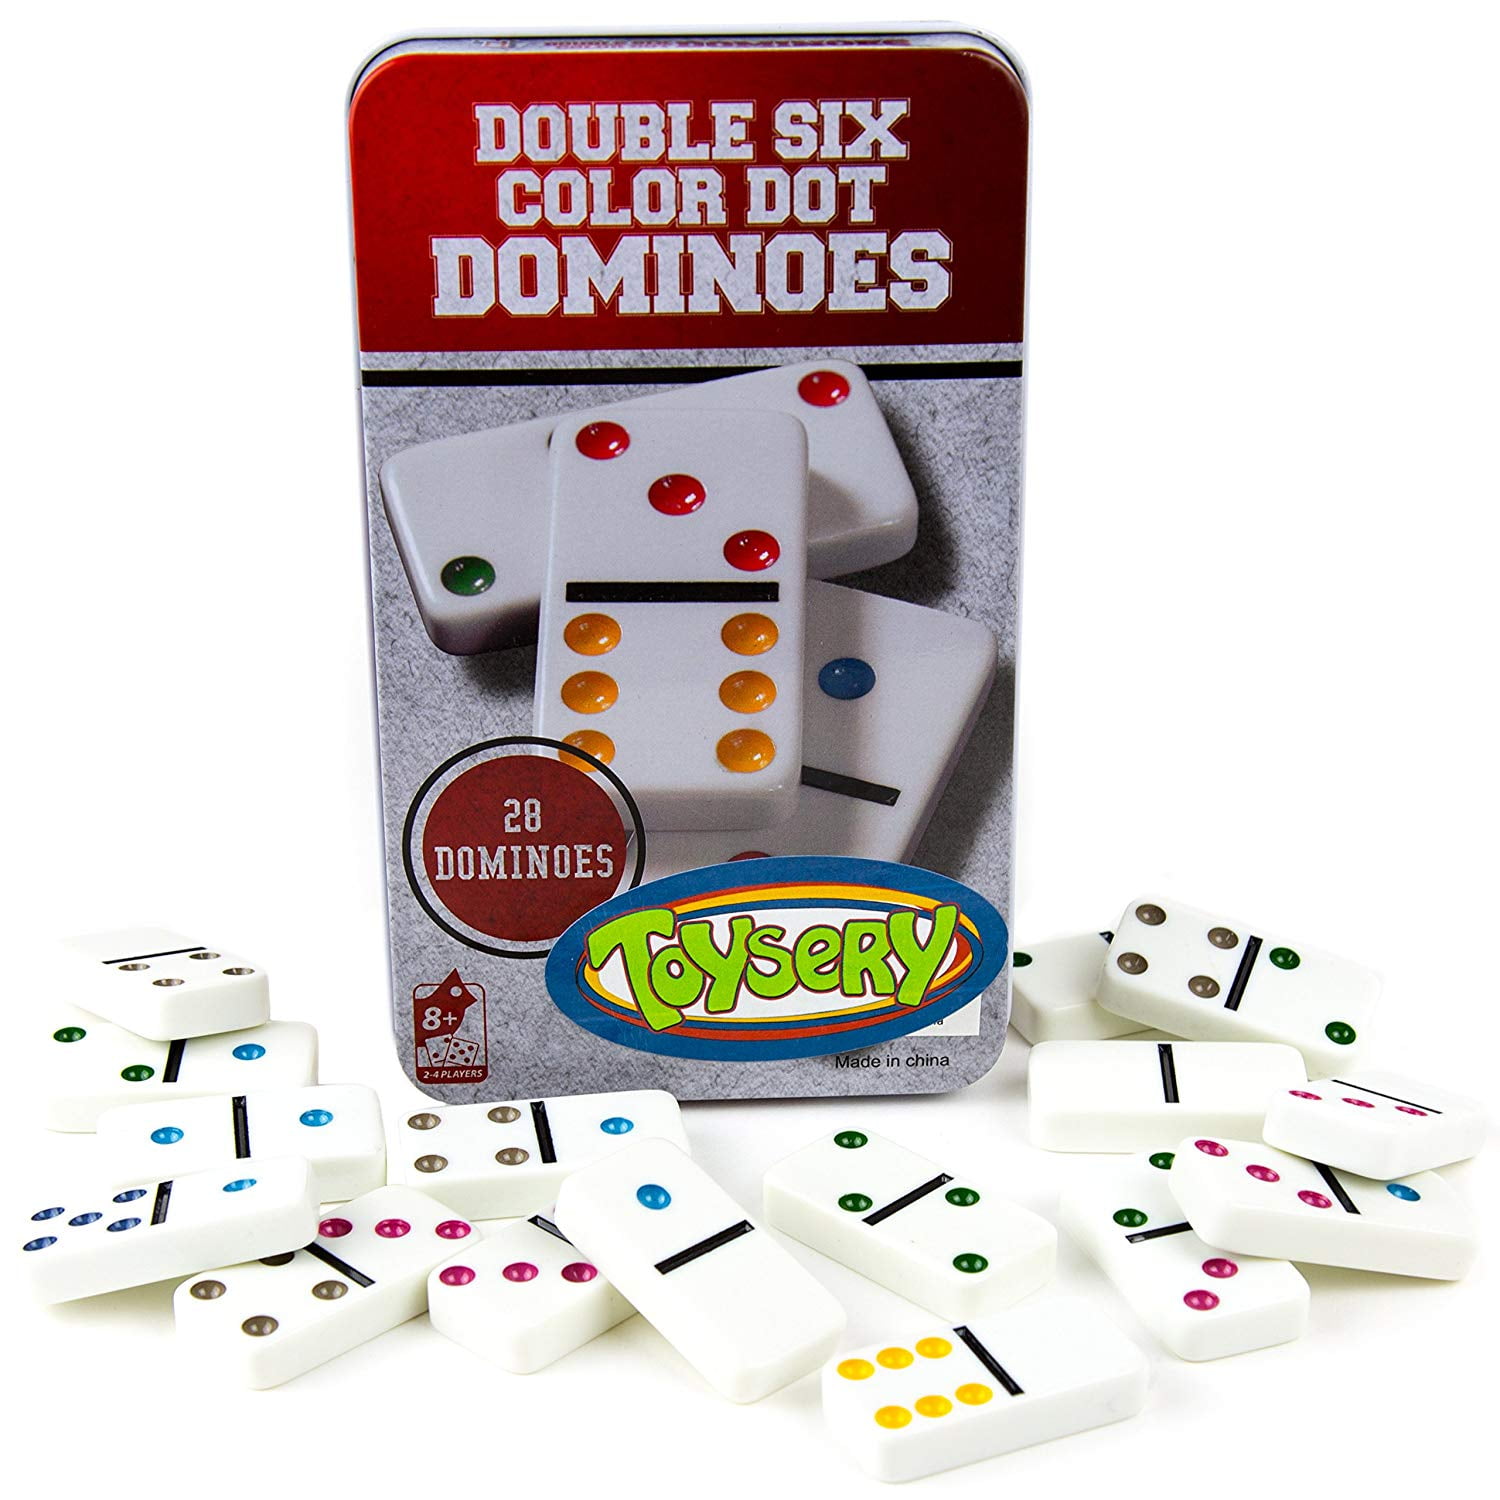 Cardinal Gallery Double 6 Color Dot Dominoes Set Game for sale online 